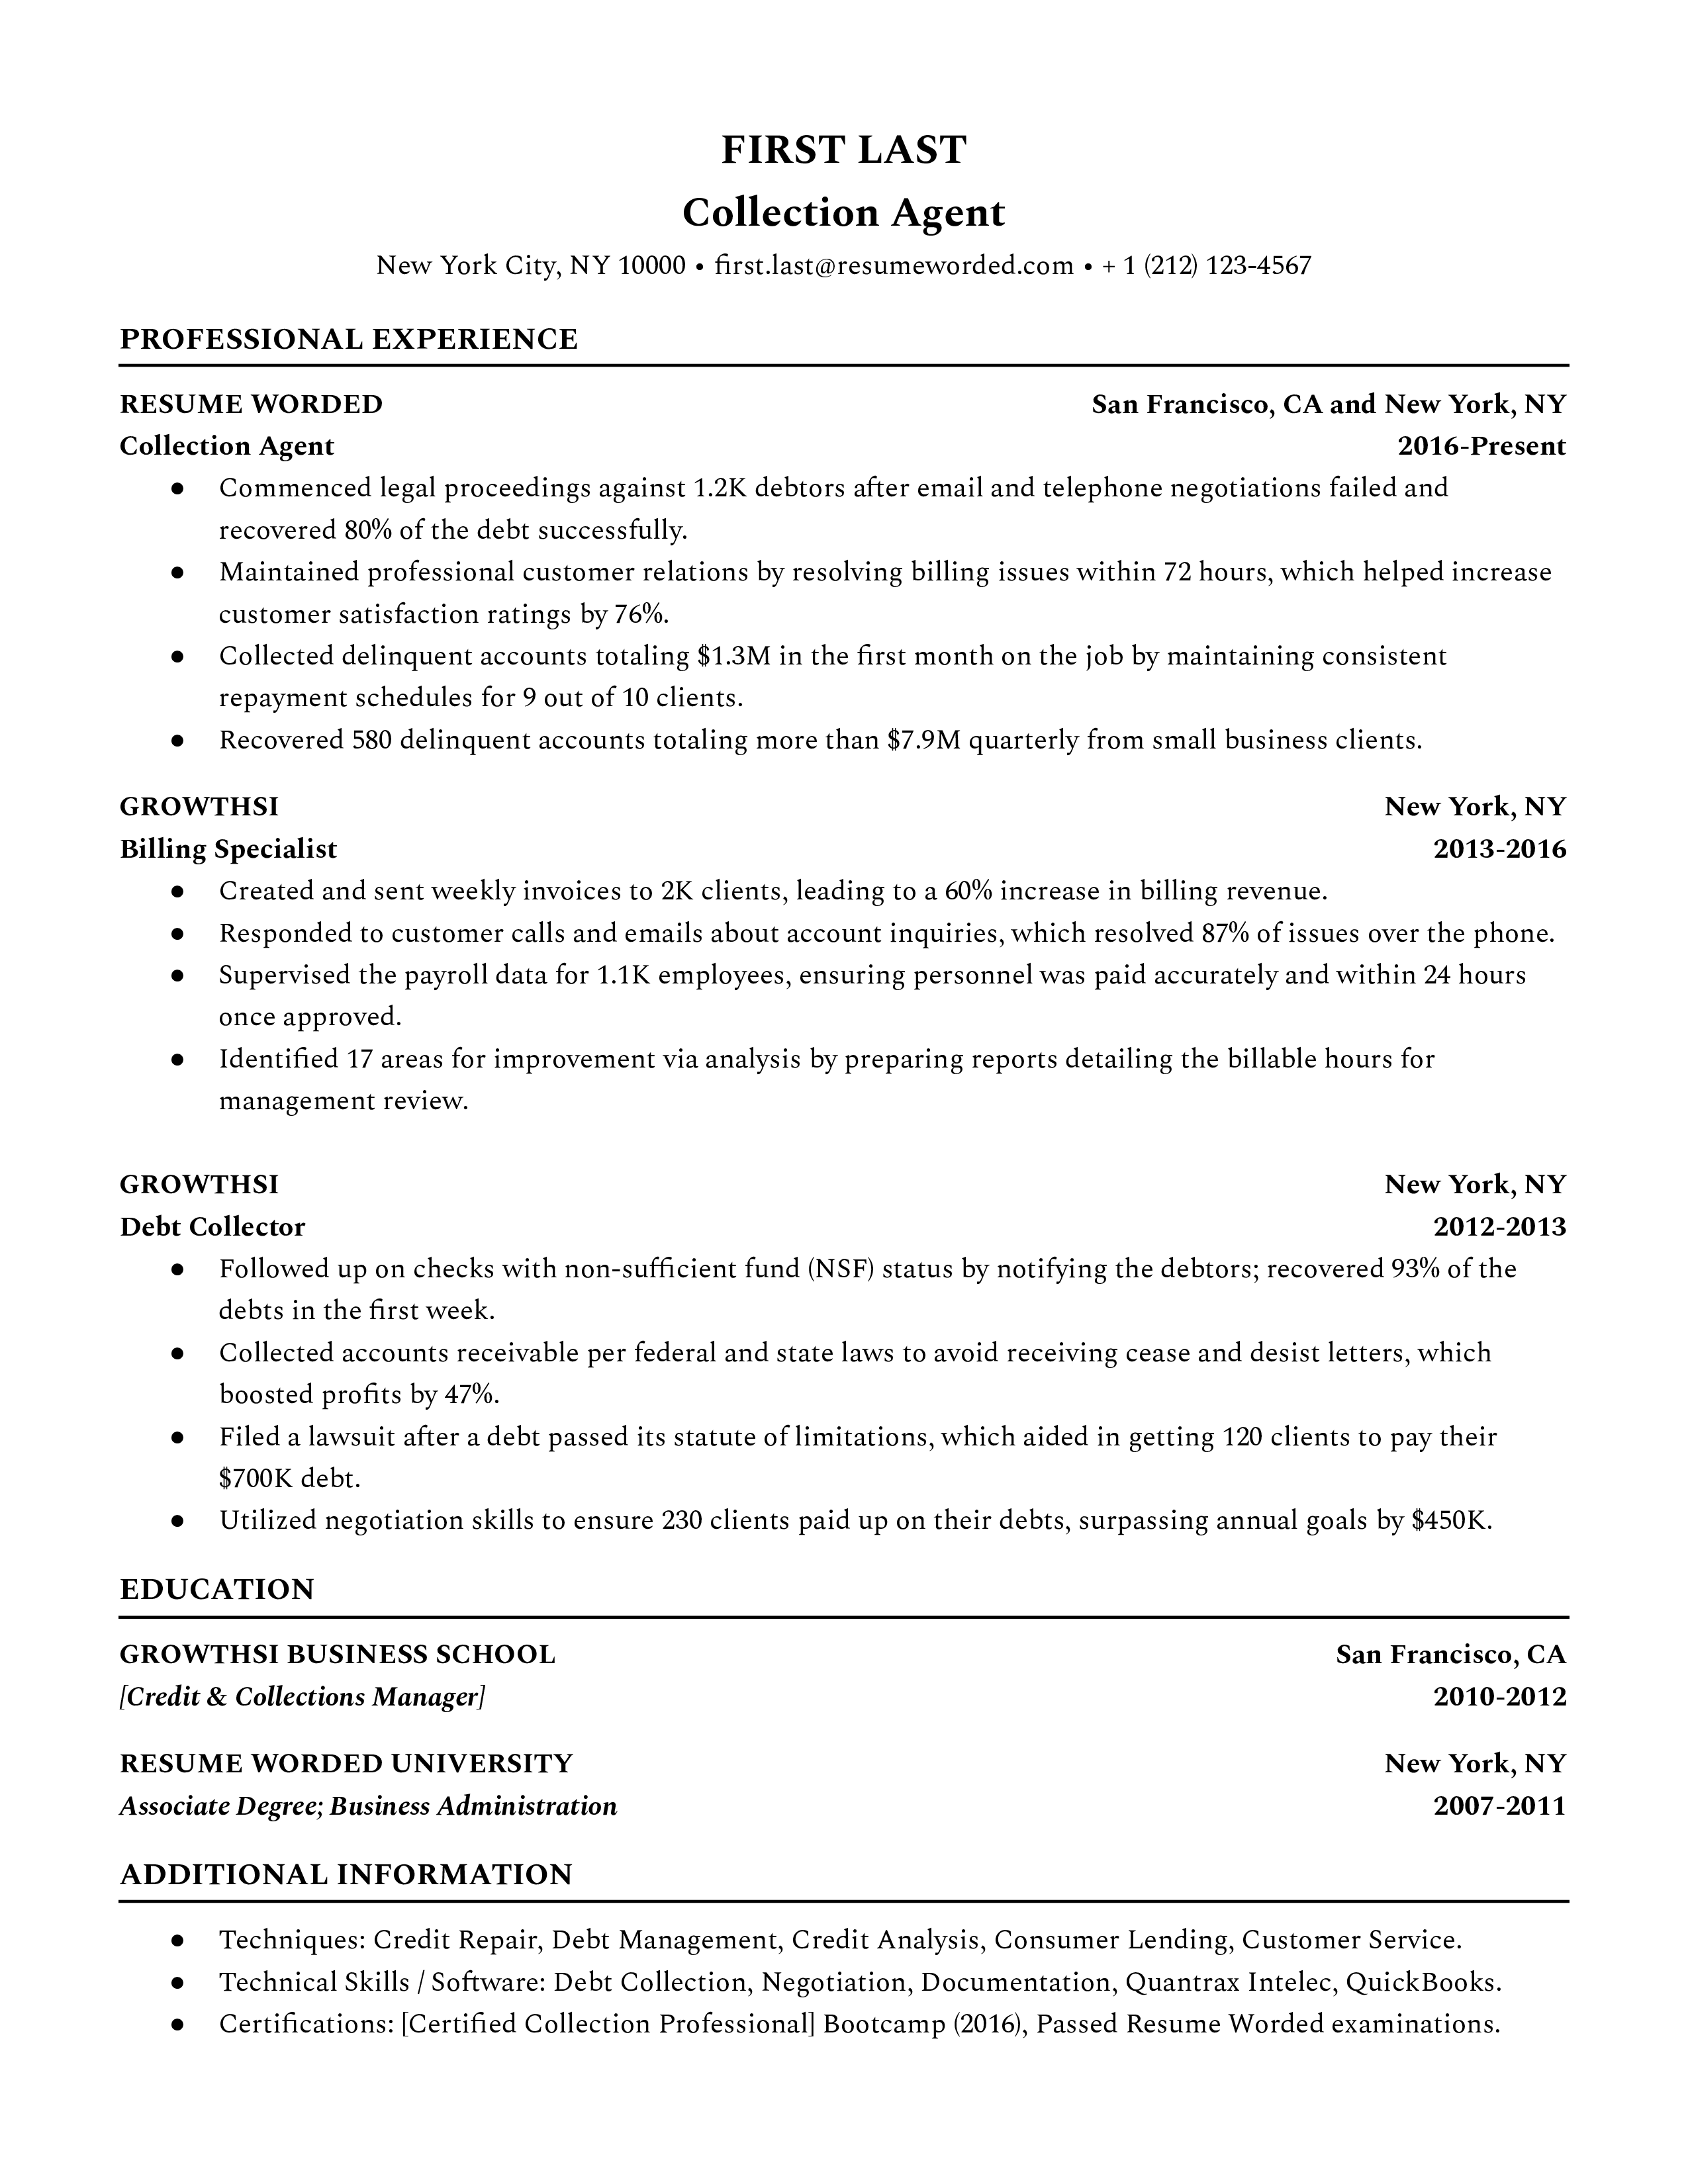 A recruiter-approved collections agent resume sample that highlights the applicant's impact on the bottom line and career growth.